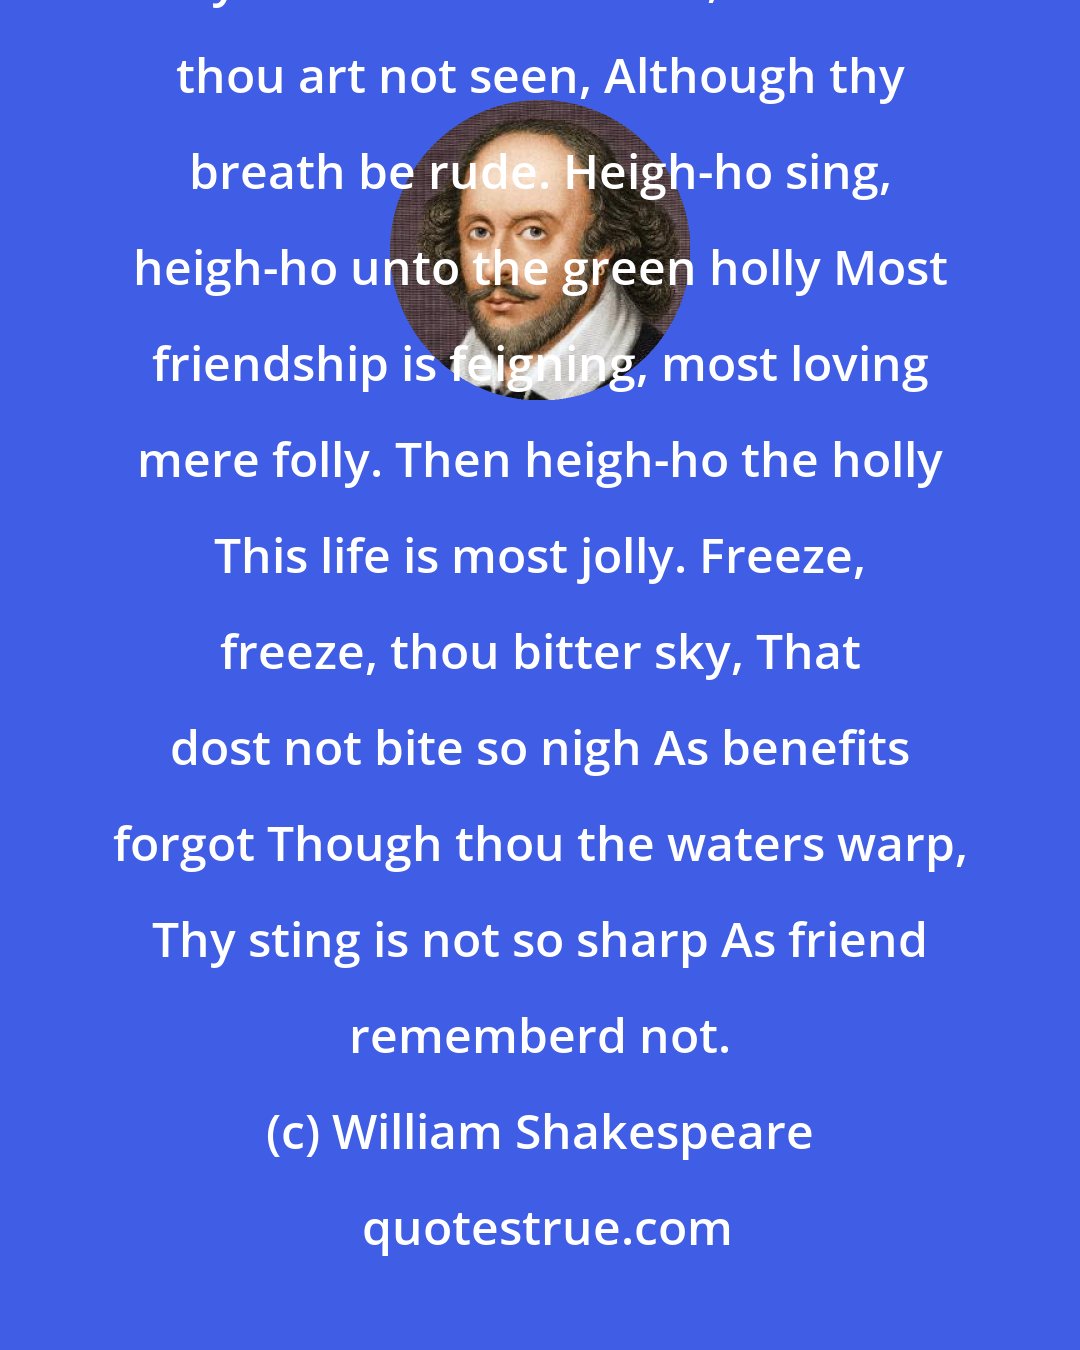 William Shakespeare: Blow, blow, thou winter wind, Thou art not so unkind As mans ingratitude Thy tooth is not so keen, Because thou art not seen, Although thy breath be rude. Heigh-ho sing, heigh-ho unto the green holly Most friendship is feigning, most loving mere folly. Then heigh-ho the holly This life is most jolly. Freeze, freeze, thou bitter sky, That dost not bite so nigh As benefits forgot Though thou the waters warp, Thy sting is not so sharp As friend rememberd not.